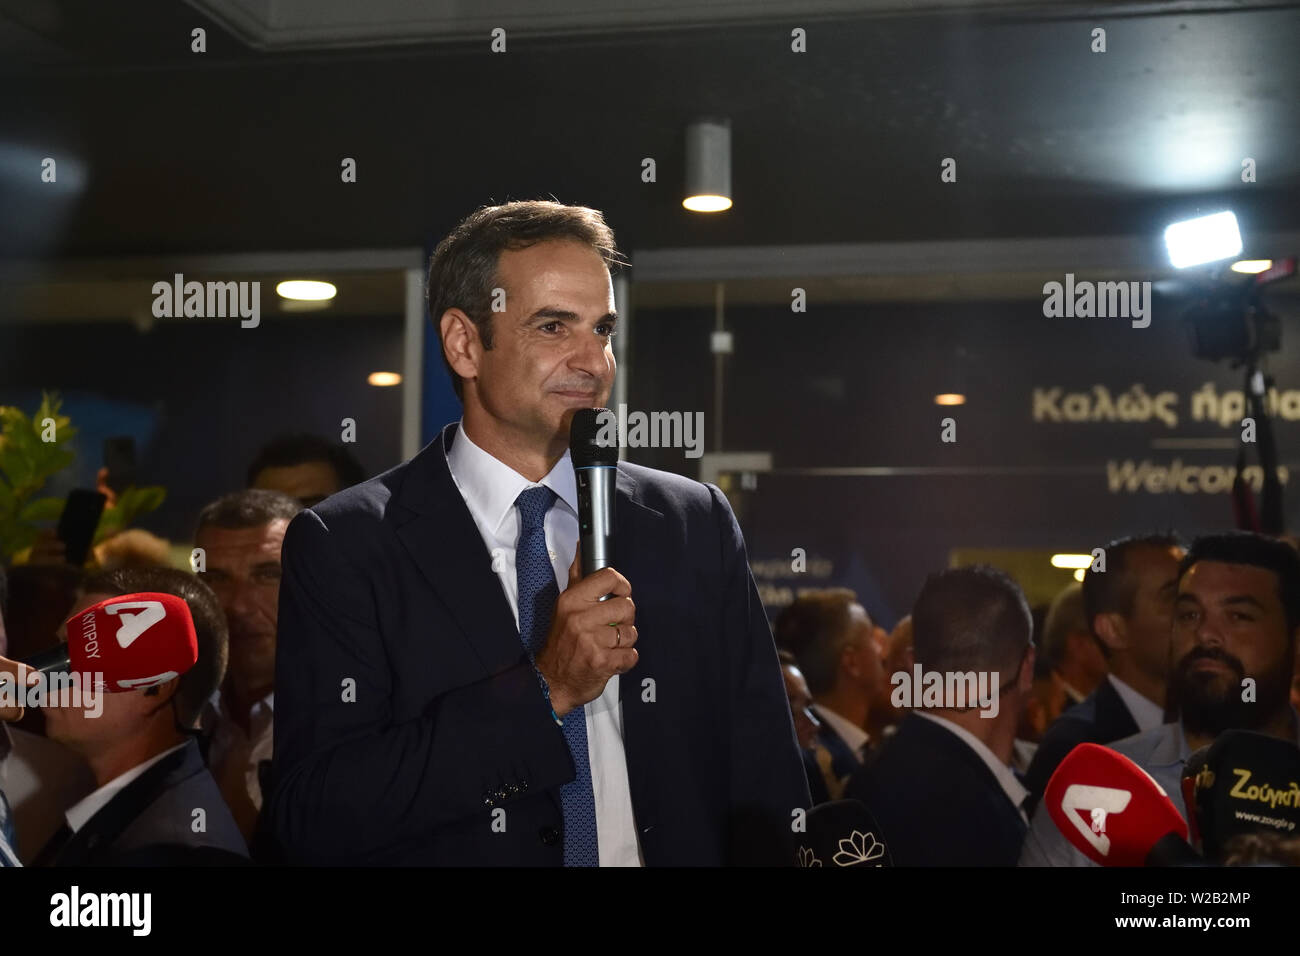 Athens, Greece. 7th Jul 2019. New Democracy leader Kyriakos Mitsotakis greets supporters at the party's headquarters following his victory at the parliamentary elections in Athens, Greece. Credit: Nicolas Koutsokostas/Alamy Stock Photo. Stock Photo